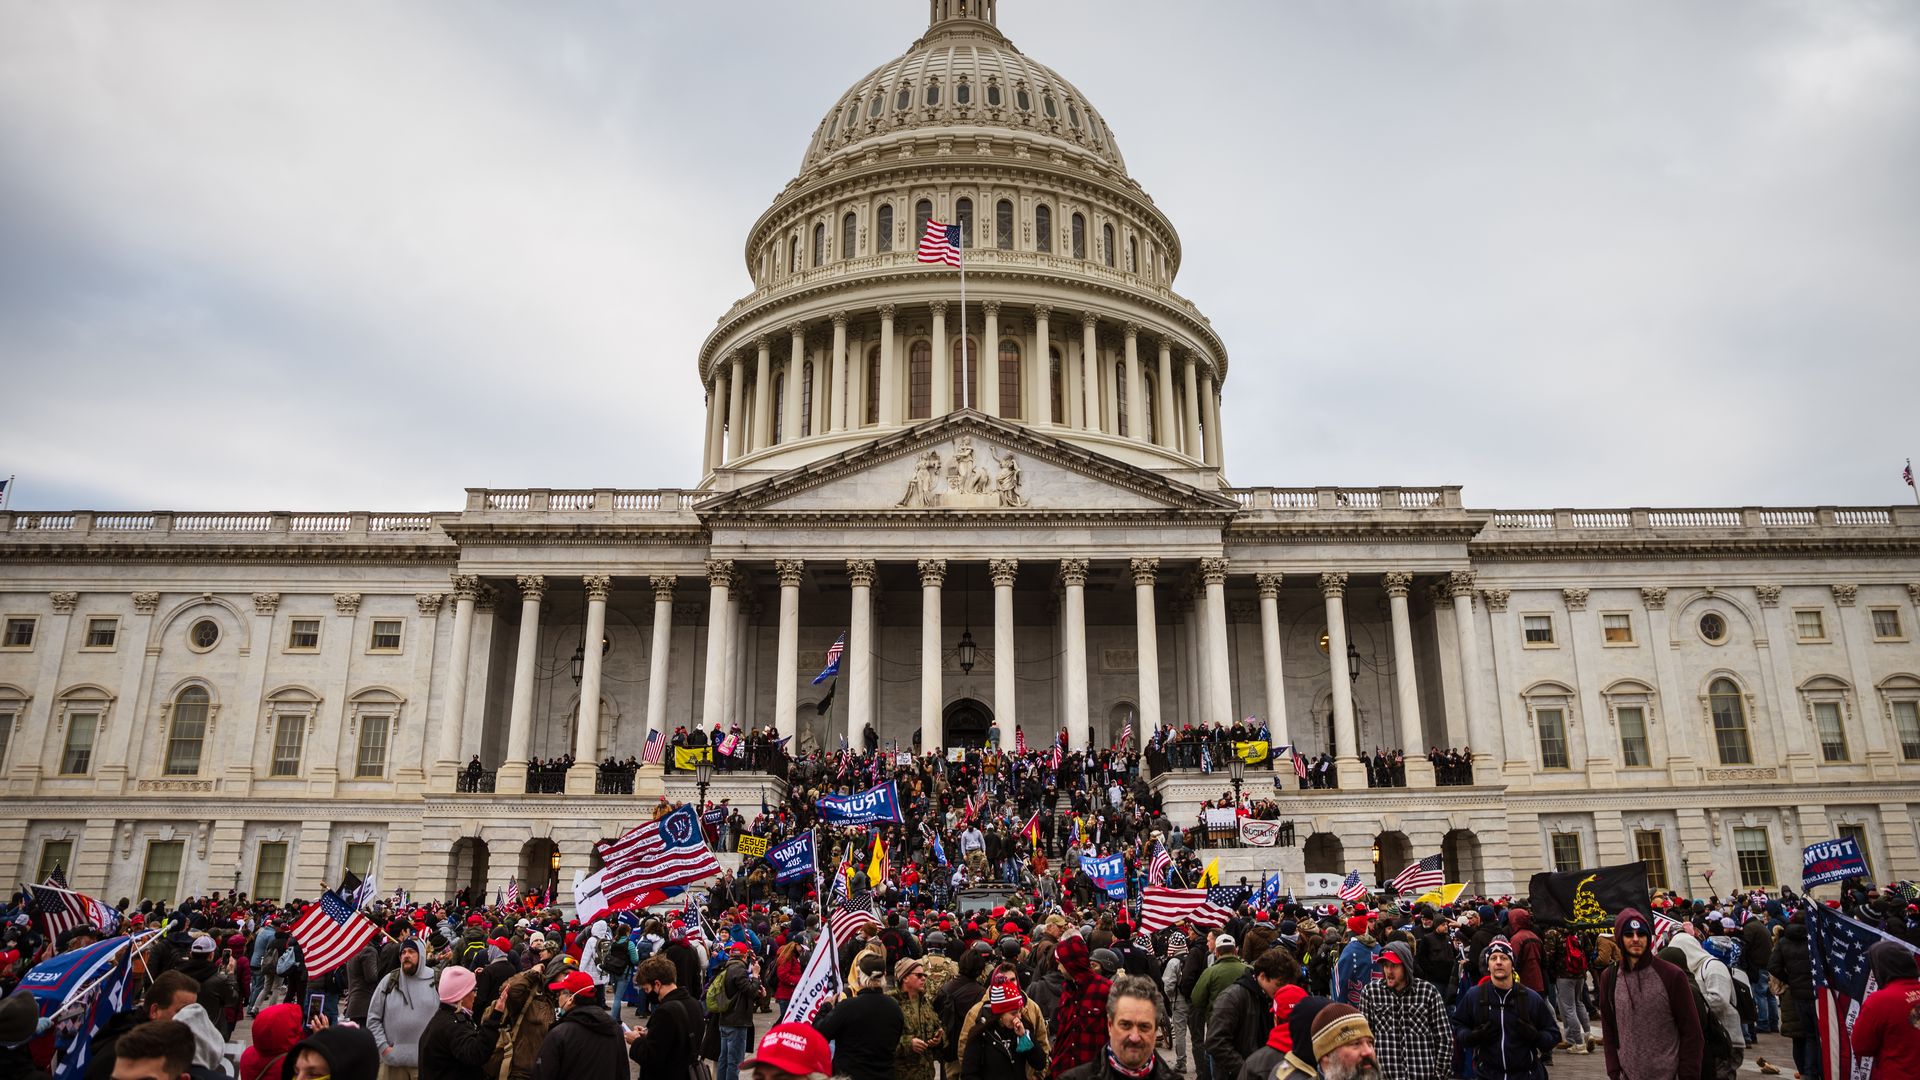  A large group of pro-Trump protesters stand on the East steps of the Capitol Building after storming its grounds on January 6, 2021 in Washington, DC. 